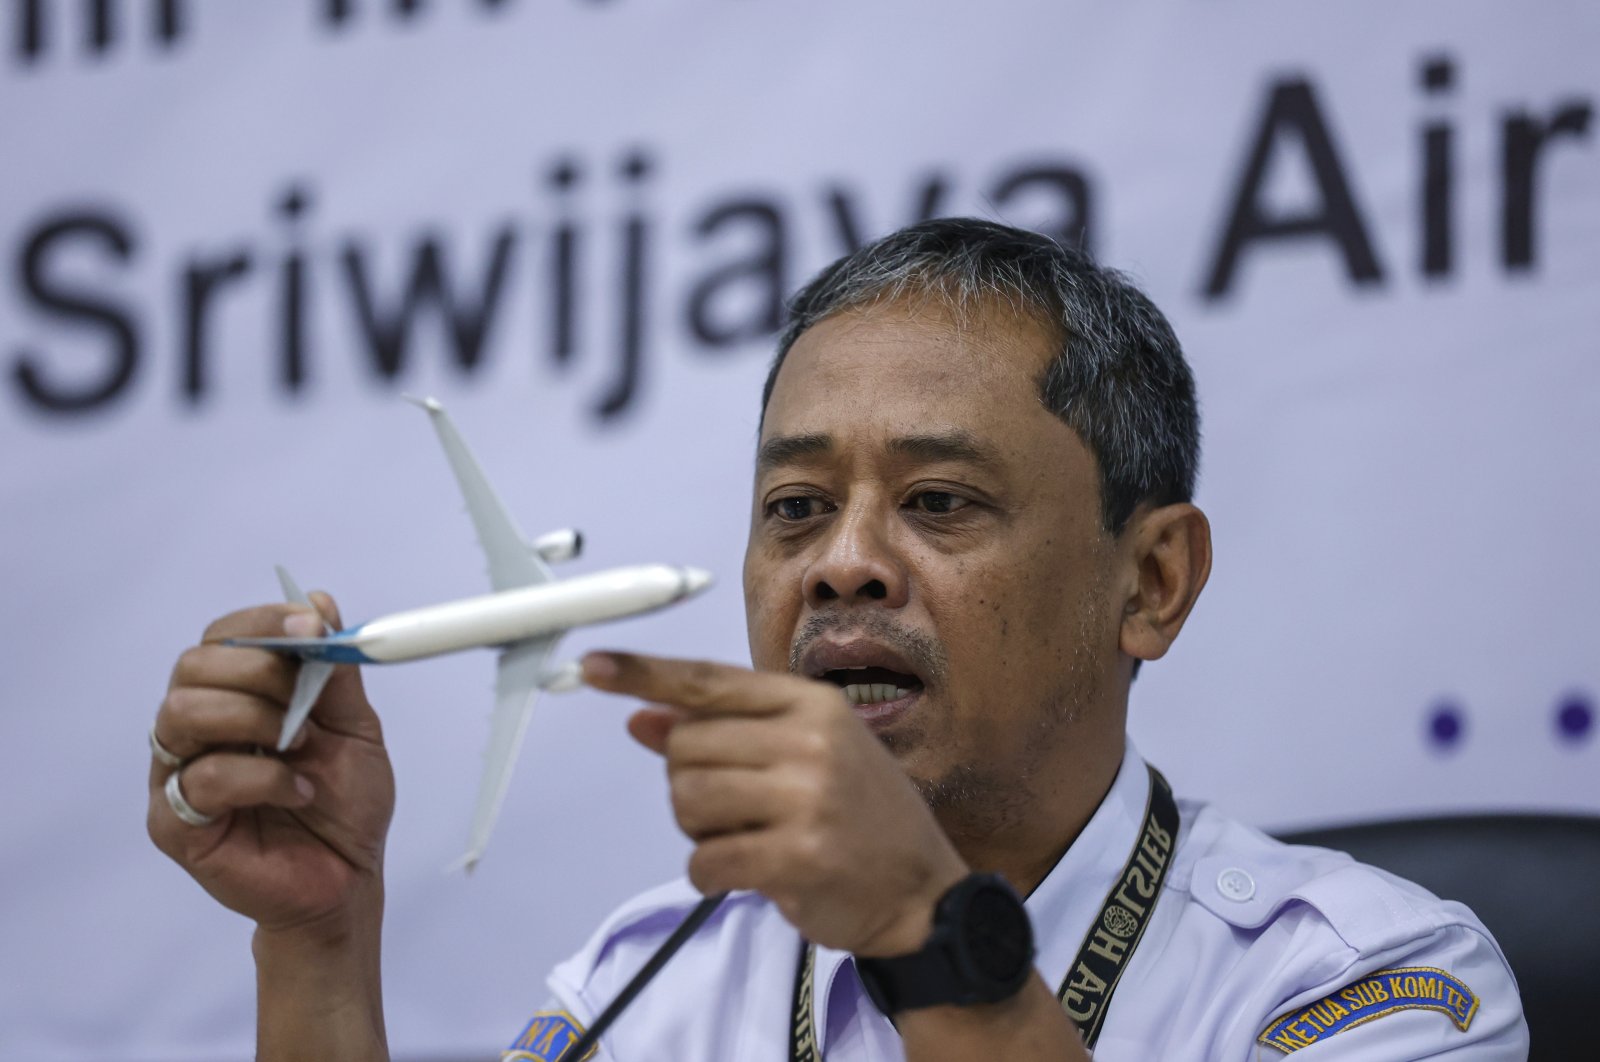 Indonesia&#039;s National Transportation Safety Committee (KNKT) investigator Nurcahyo Utomo holds a Boeing 737 model during a press conference on the final report of the Sriwijaya Air flight SJ-182 crash investigation in Jakarta, Indonesia, Nov. 10, 2022. (EPA Photo)